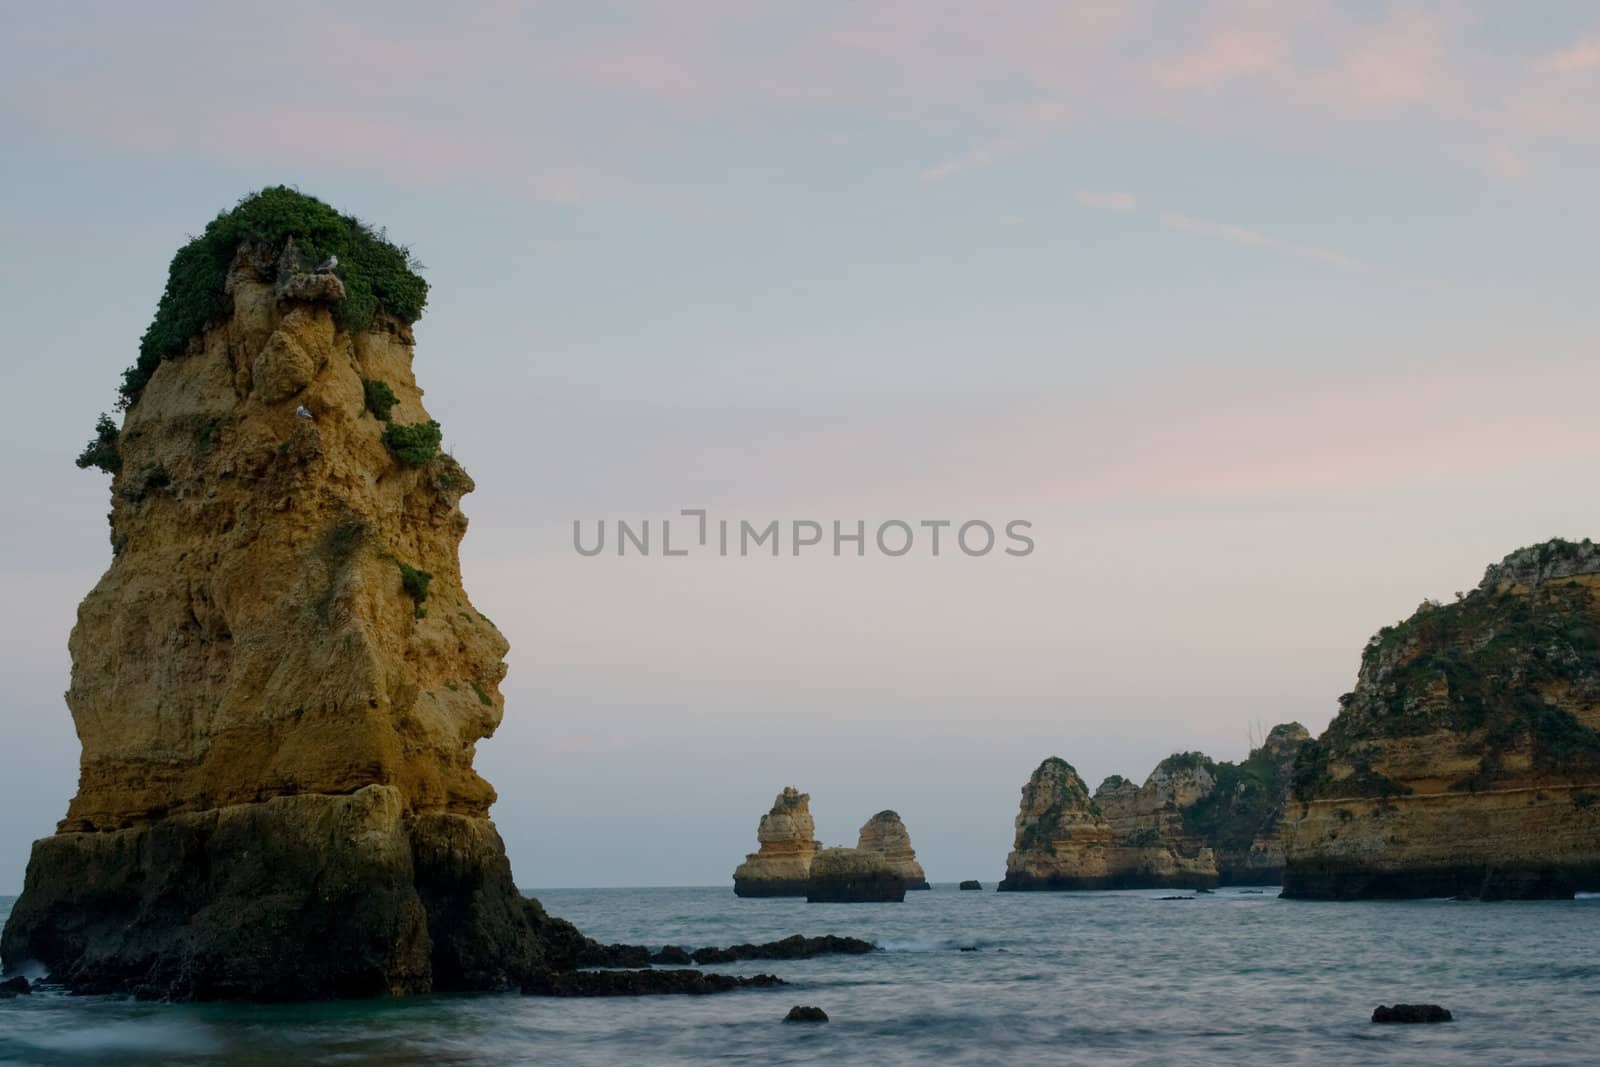 Along the beaches in Lagos, Portugal, a number of sheer rocky outcrops, as the sun sets casting pinks and blues in the sky.